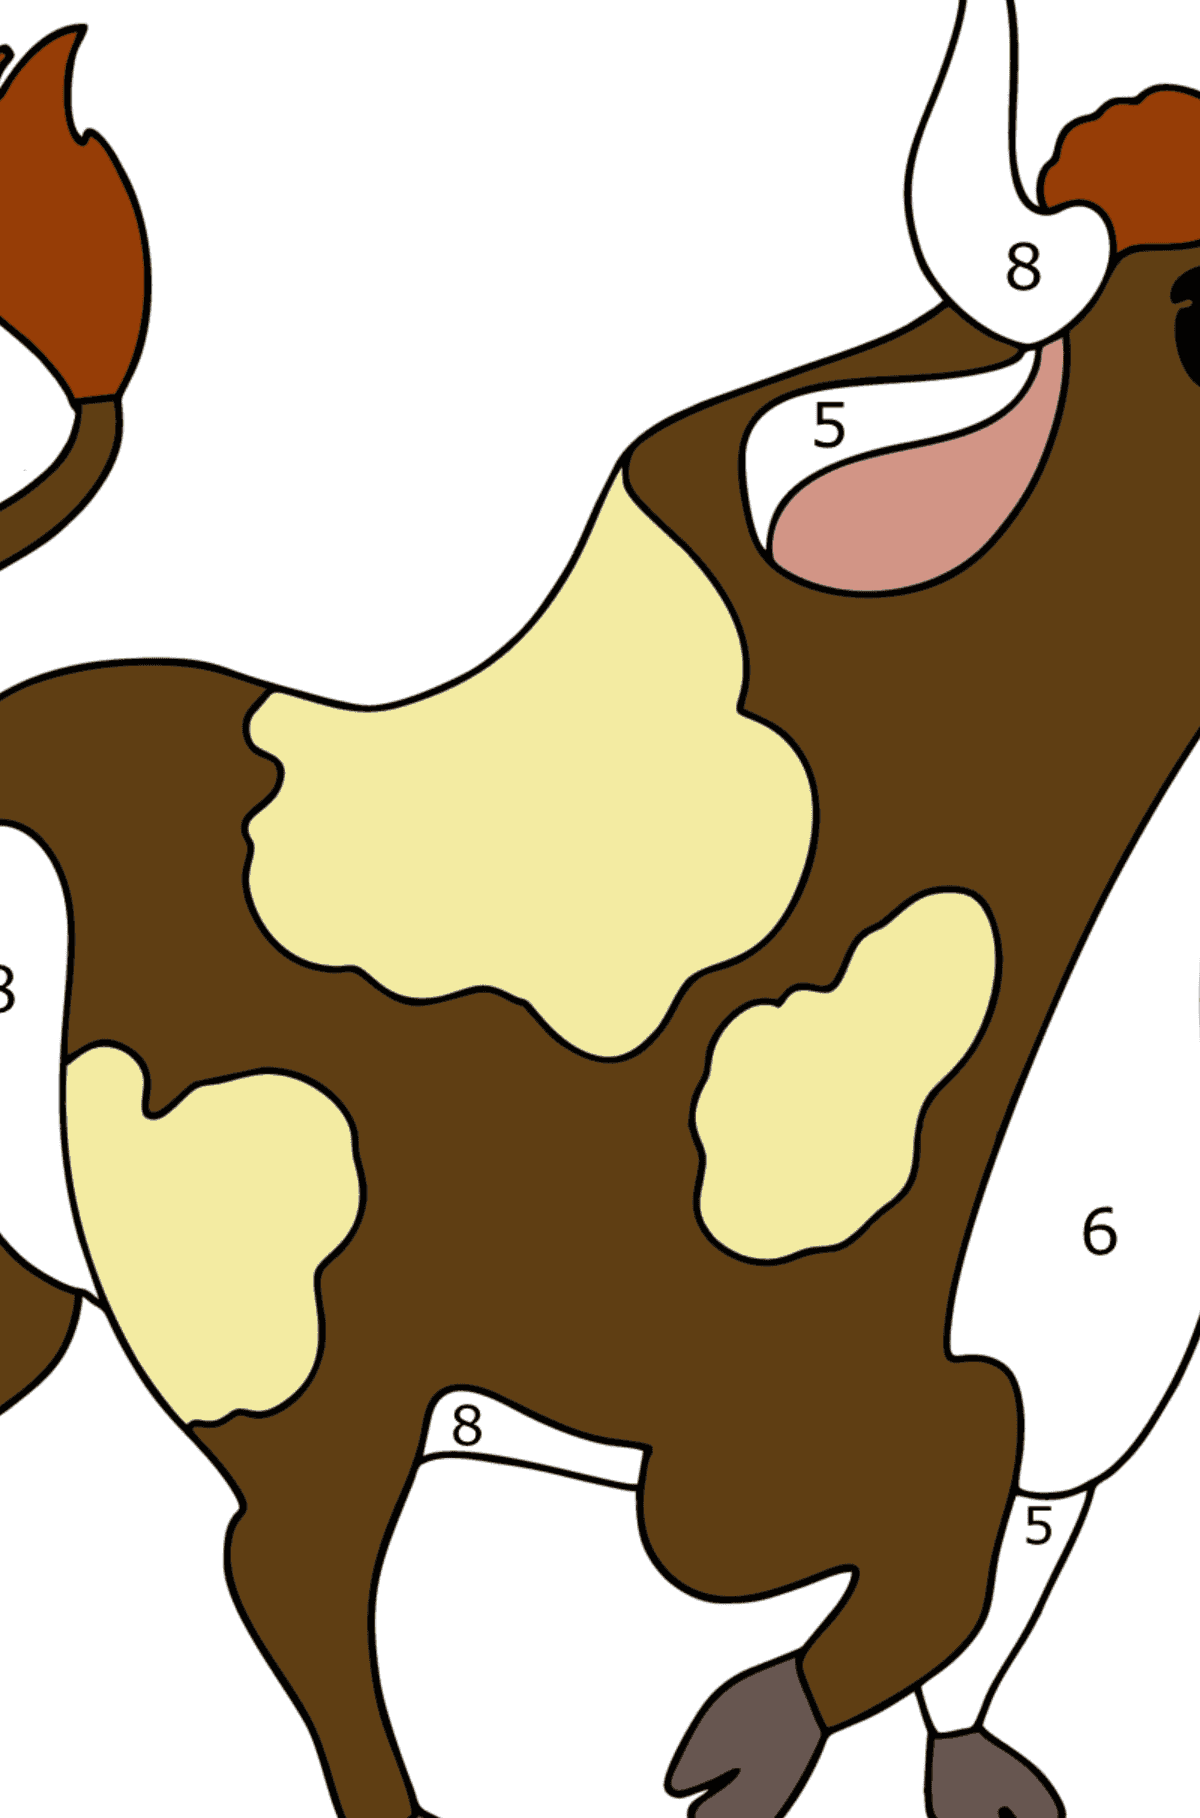 Bull drawing Coloring page - Coloring by Numbers for Kids